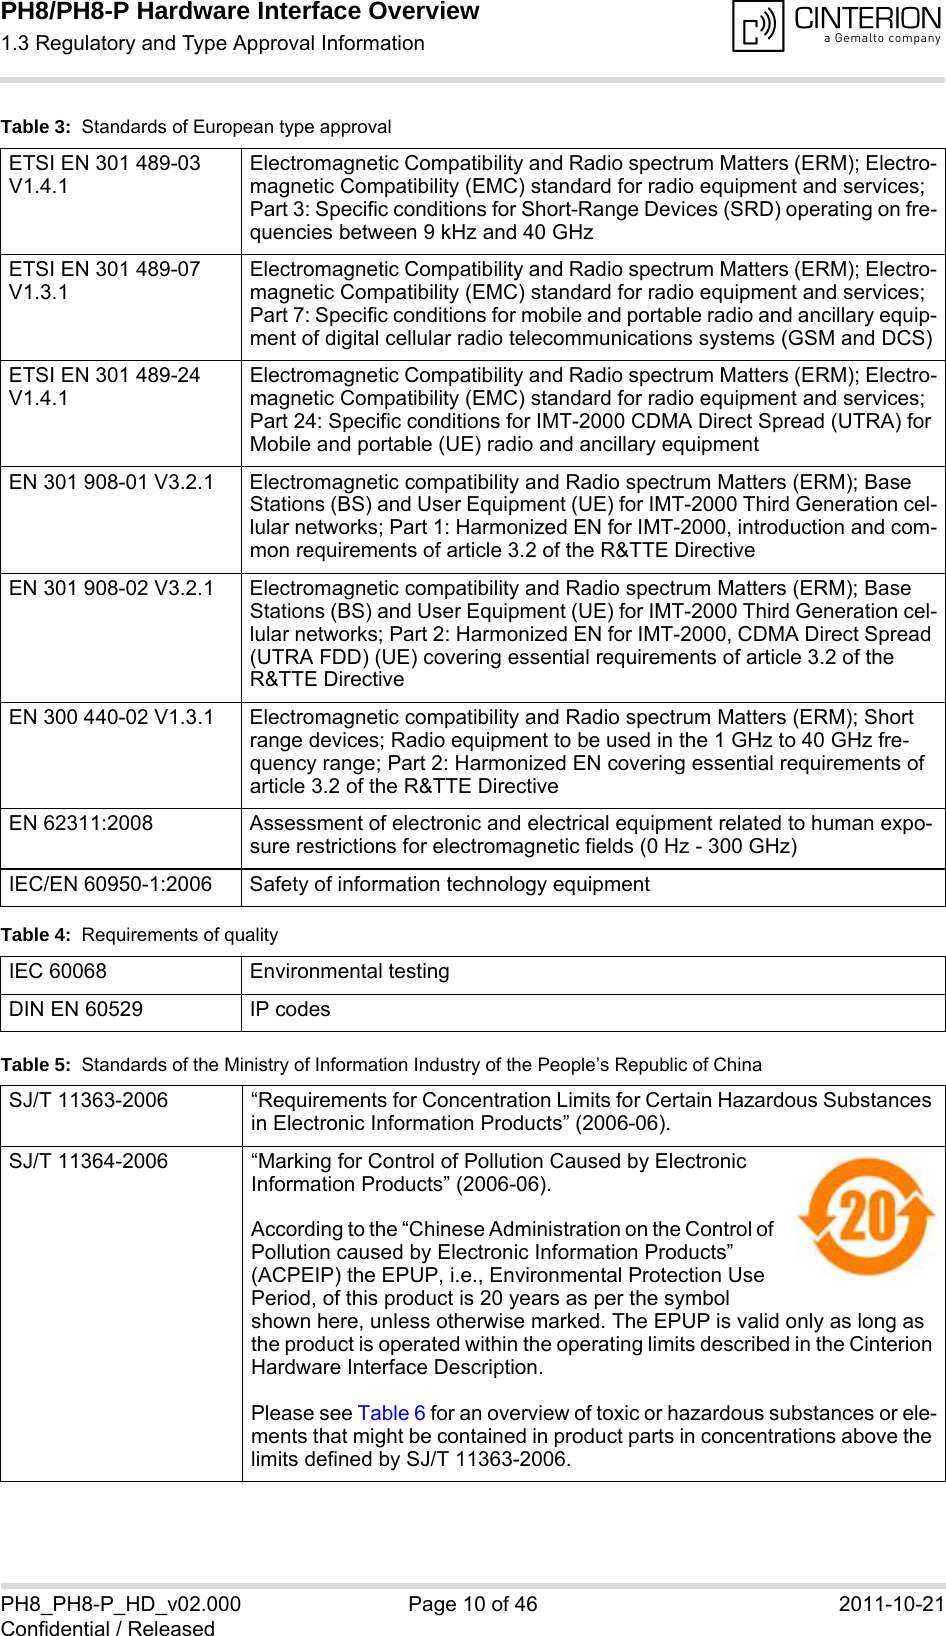 PH8/PH8-P Hardware Interface Overview1.3 Regulatory and Type Approval Information14PH8_PH8-P_HD_v02.000 Page 10 of 46 2011-10-21Confidential / ReleasedETSI EN 301 489-03 V1.4.1Electromagnetic Compatibility and Radio spectrum Matters (ERM); Electro-magnetic Compatibility (EMC) standard for radio equipment and services; Part 3: Specific conditions for Short-Range Devices (SRD) operating on fre-quencies between 9 kHz and 40 GHz ETSI EN 301 489-07 V1.3.1Electromagnetic Compatibility and Radio spectrum Matters (ERM); Electro-magnetic Compatibility (EMC) standard for radio equipment and services; Part 7: Specific conditions for mobile and portable radio and ancillary equip-ment of digital cellular radio telecommunications systems (GSM and DCS)ETSI EN 301 489-24 V1.4.1Electromagnetic Compatibility and Radio spectrum Matters (ERM); Electro-magnetic Compatibility (EMC) standard for radio equipment and services; Part 24: Specific conditions for IMT-2000 CDMA Direct Spread (UTRA) for Mobile and portable (UE) radio and ancillary equipmentEN 301 908-01 V3.2.1 Electromagnetic compatibility and Radio spectrum Matters (ERM); Base Stations (BS) and User Equipment (UE) for IMT-2000 Third Generation cel-lular networks; Part 1: Harmonized EN for IMT-2000, introduction and com-mon requirements of article 3.2 of the R&amp;TTE DirectiveEN 301 908-02 V3.2.1 Electromagnetic compatibility and Radio spectrum Matters (ERM); Base Stations (BS) and User Equipment (UE) for IMT-2000 Third Generation cel-lular networks; Part 2: Harmonized EN for IMT-2000, CDMA Direct Spread (UTRA FDD) (UE) covering essential requirements of article 3.2 of the R&amp;TTE DirectiveEN 300 440-02 V1.3.1  Electromagnetic compatibility and Radio spectrum Matters (ERM); Short range devices; Radio equipment to be used in the 1 GHz to 40 GHz fre-quency range; Part 2: Harmonized EN covering essential requirements of article 3.2 of the R&amp;TTE Directive EN 62311:2008 Assessment of electronic and electrical equipment related to human expo-sure restrictions for electromagnetic fields (0 Hz - 300 GHz)IEC/EN 60950-1:2006 Safety of information technology equipmentTable 4:  Requirements of qualityIEC 60068 Environmental testingDIN EN 60529 IP codesTable 5:  Standards of the Ministry of Information Industry of the People’s Republic of ChinaSJ/T 11363-2006  “Requirements for Concentration Limits for Certain Hazardous Substances in Electronic Information Products” (2006-06).SJ/T 11364-2006 “Marking for Control of Pollution Caused by Electronic Information Products” (2006-06).According to the “Chinese Administration on the Control of Pollution caused by Electronic Information Products” (ACPEIP) the EPUP, i.e., Environmental Protection Use Period, of this product is 20 years as per the symbol shown here, unless otherwise marked. The EPUP is valid only as long as the product is operated within the operating limits described in the Cinterion Hardware Interface Description.Please see Table 6 for an overview of toxic or hazardous substances or ele-ments that might be contained in product parts in concentrations above the limits defined by SJ/T 11363-2006. Table 3:  Standards of European type approval